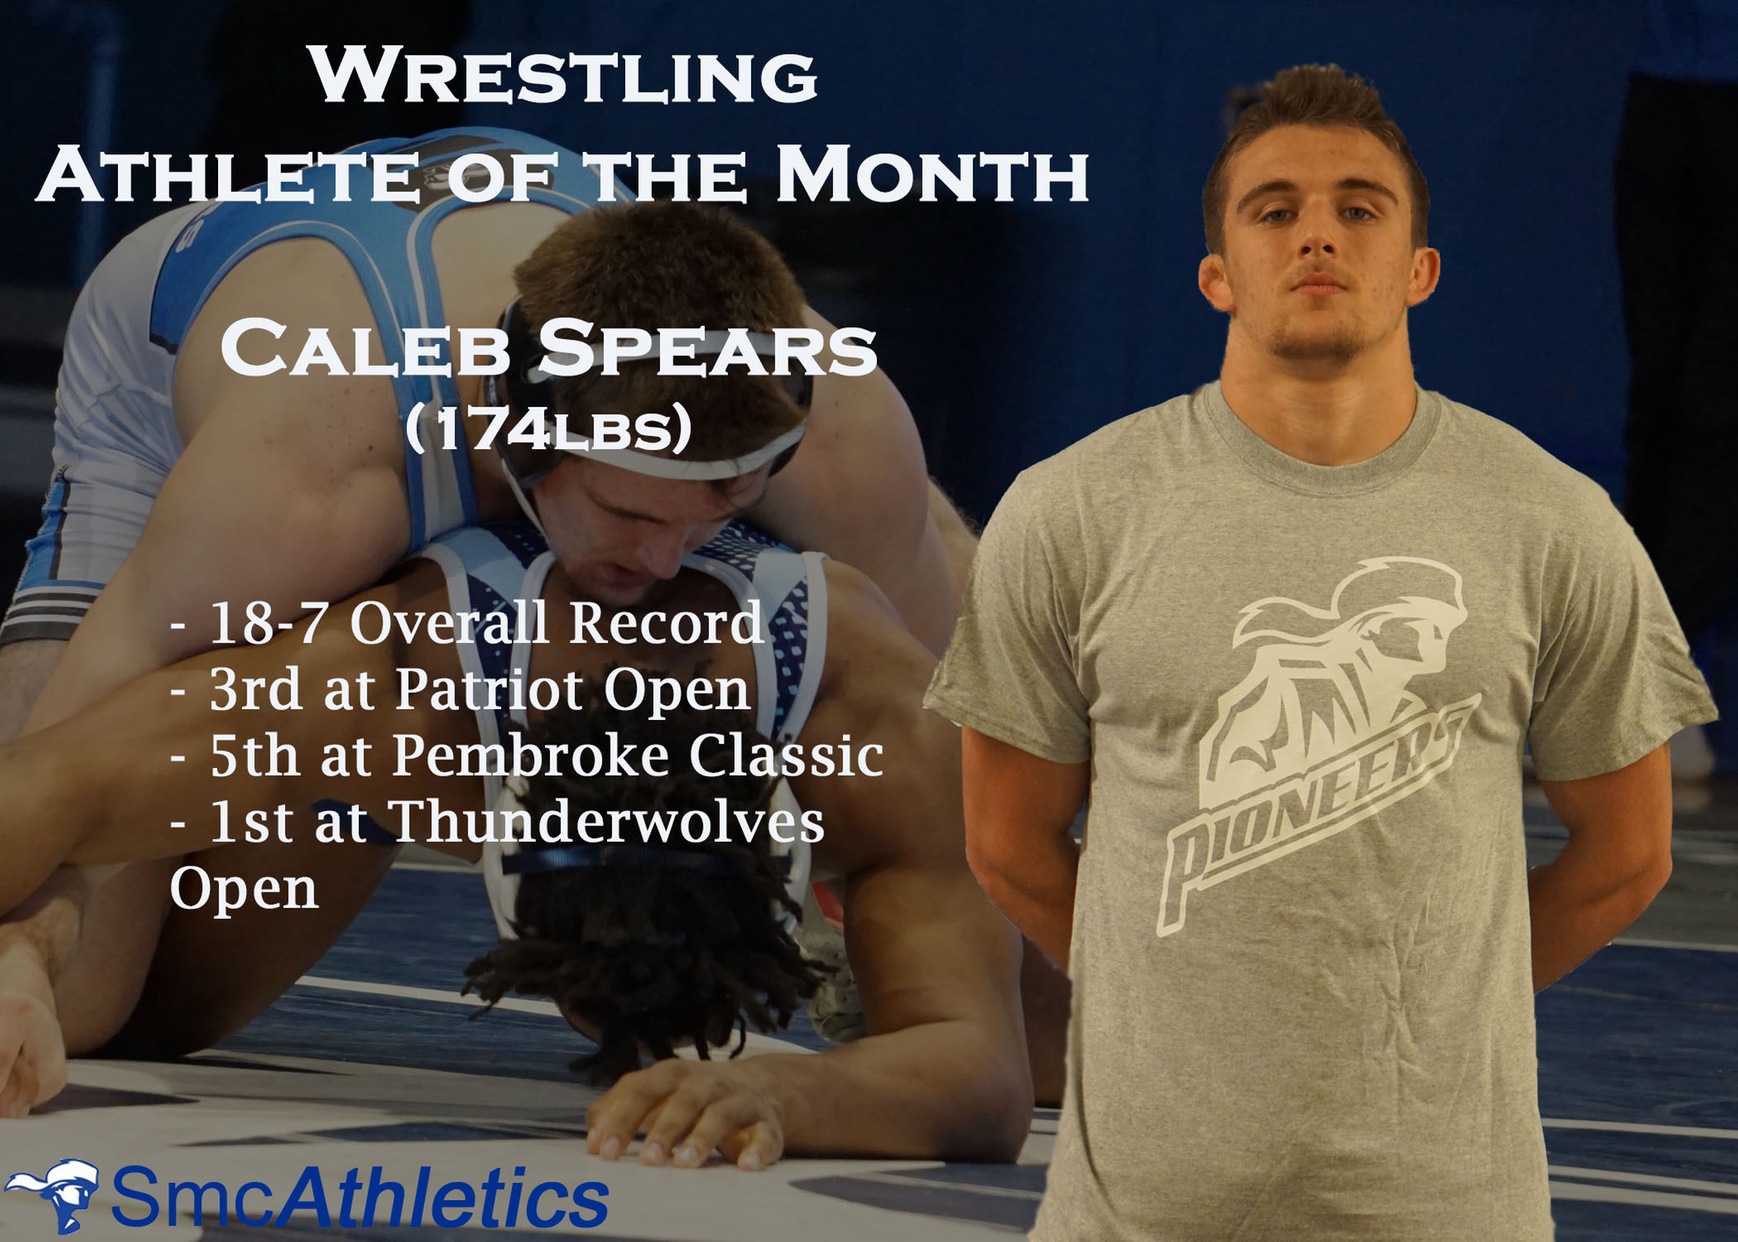 Wrestling Athlete of the Month